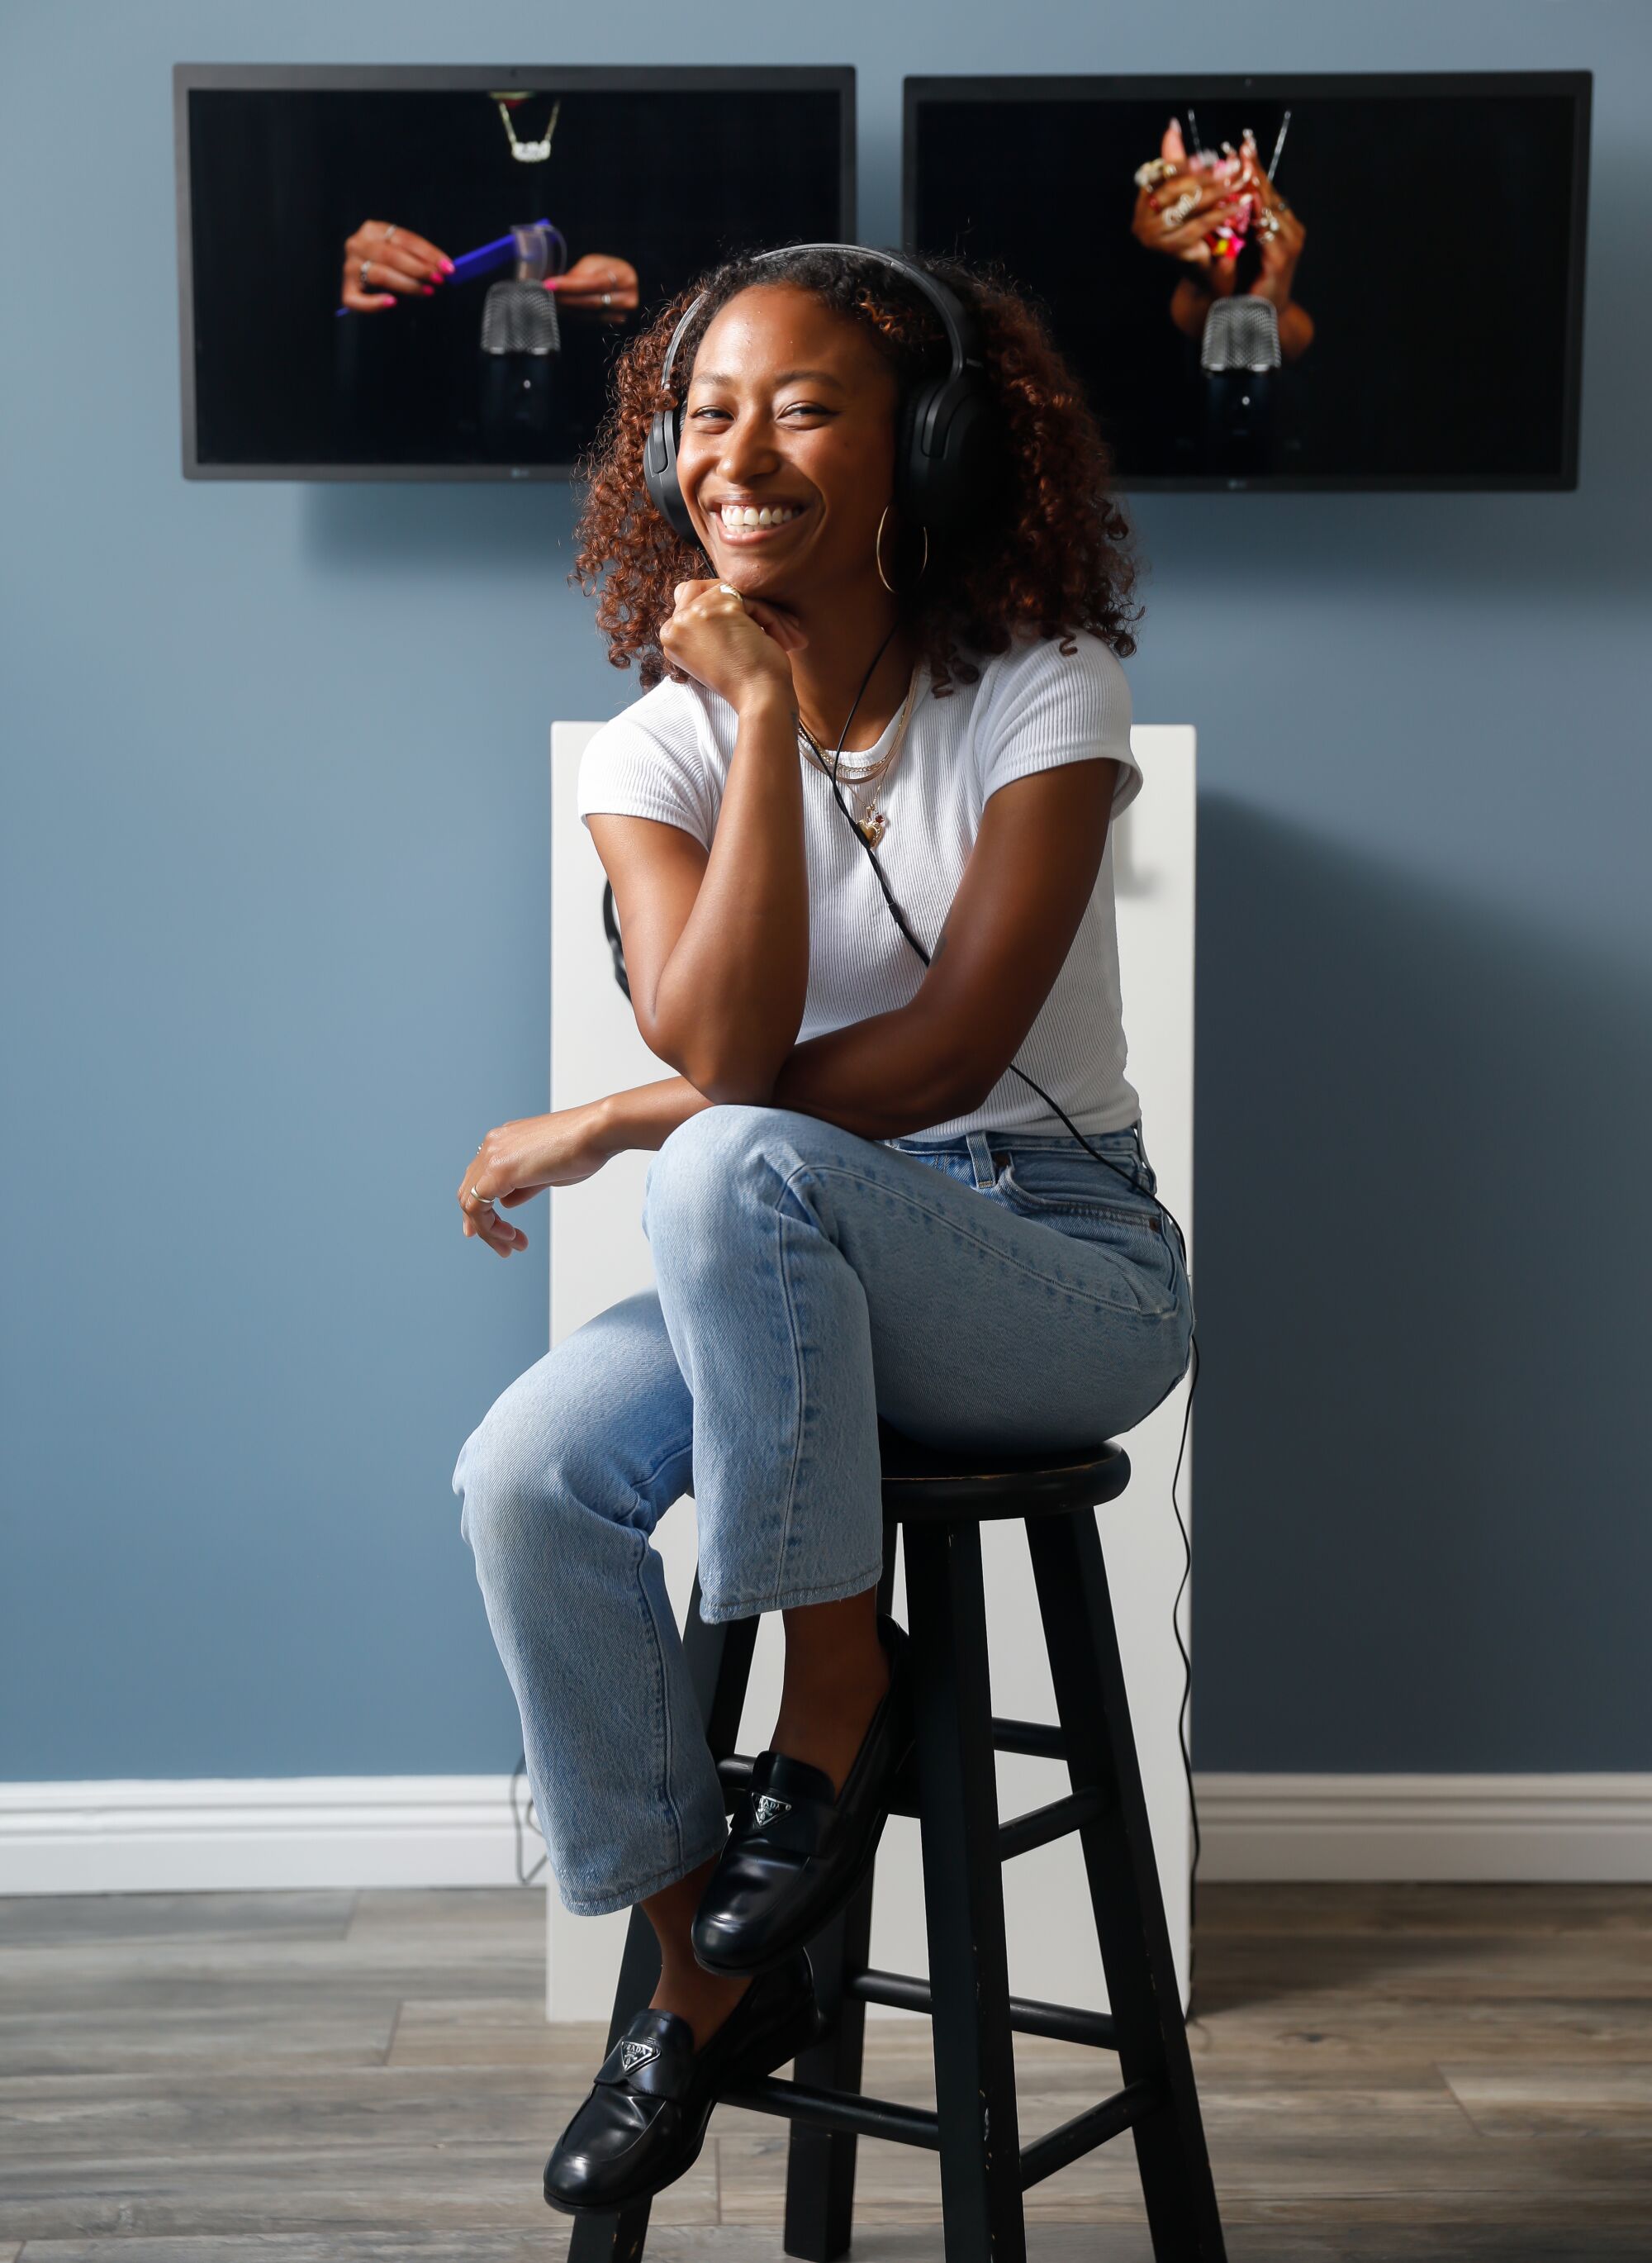 A Black woman wears headphones and sits on a stool smiling